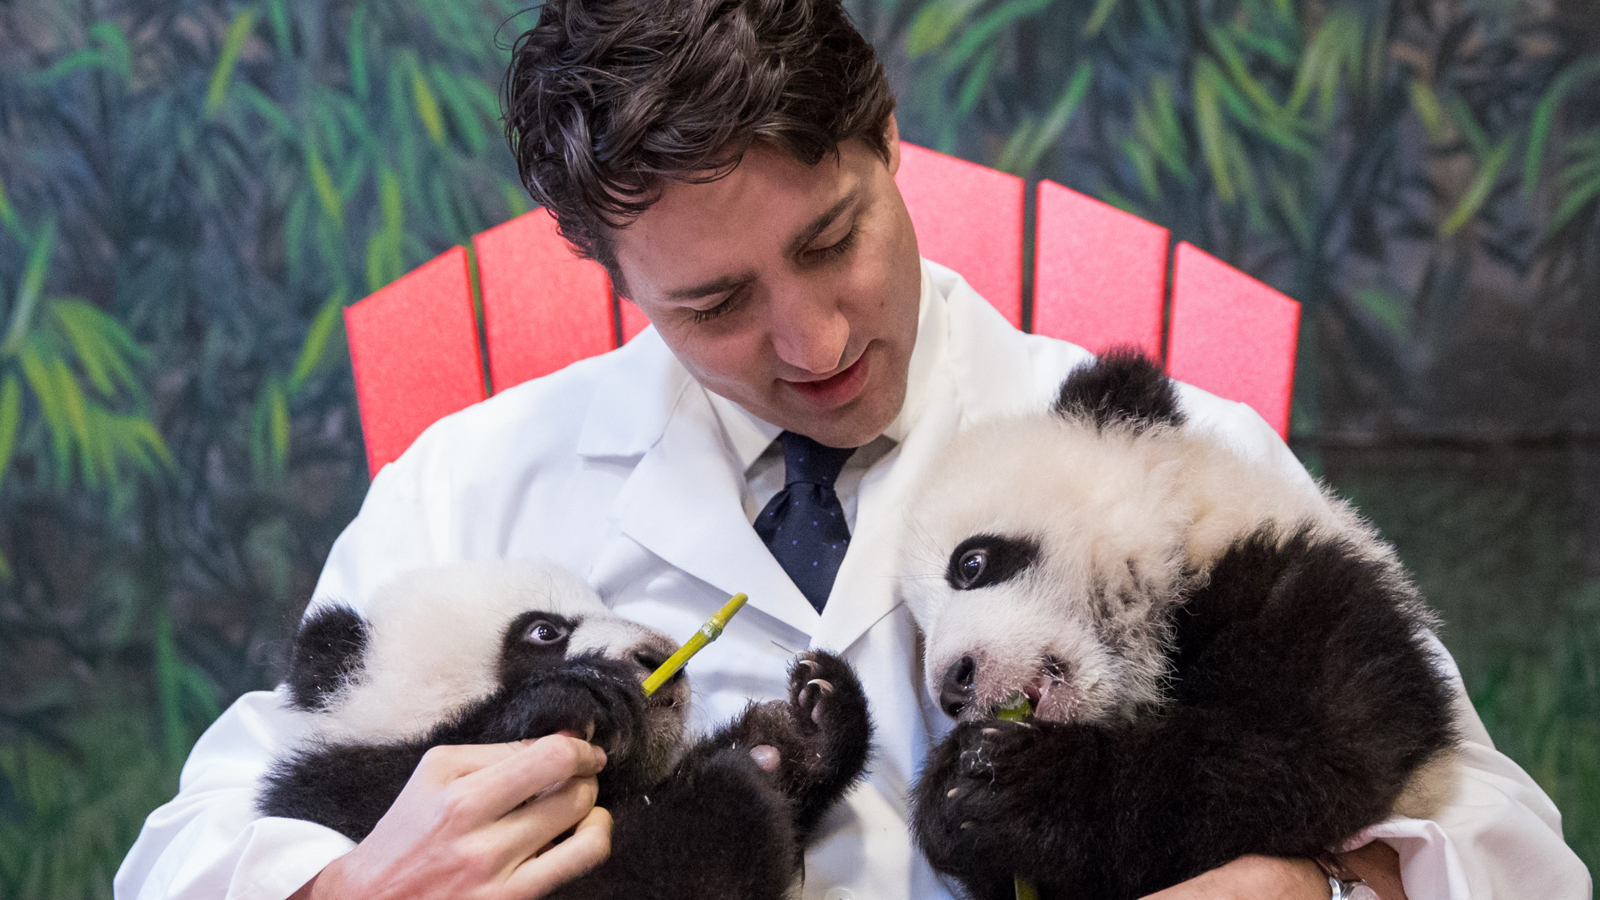 A two thousand and sixteen photograph of Canadian prime minister Justin Trudeau holding Toronto Zoo’s panda cubs Jia Panpan and Jia Yueyue.